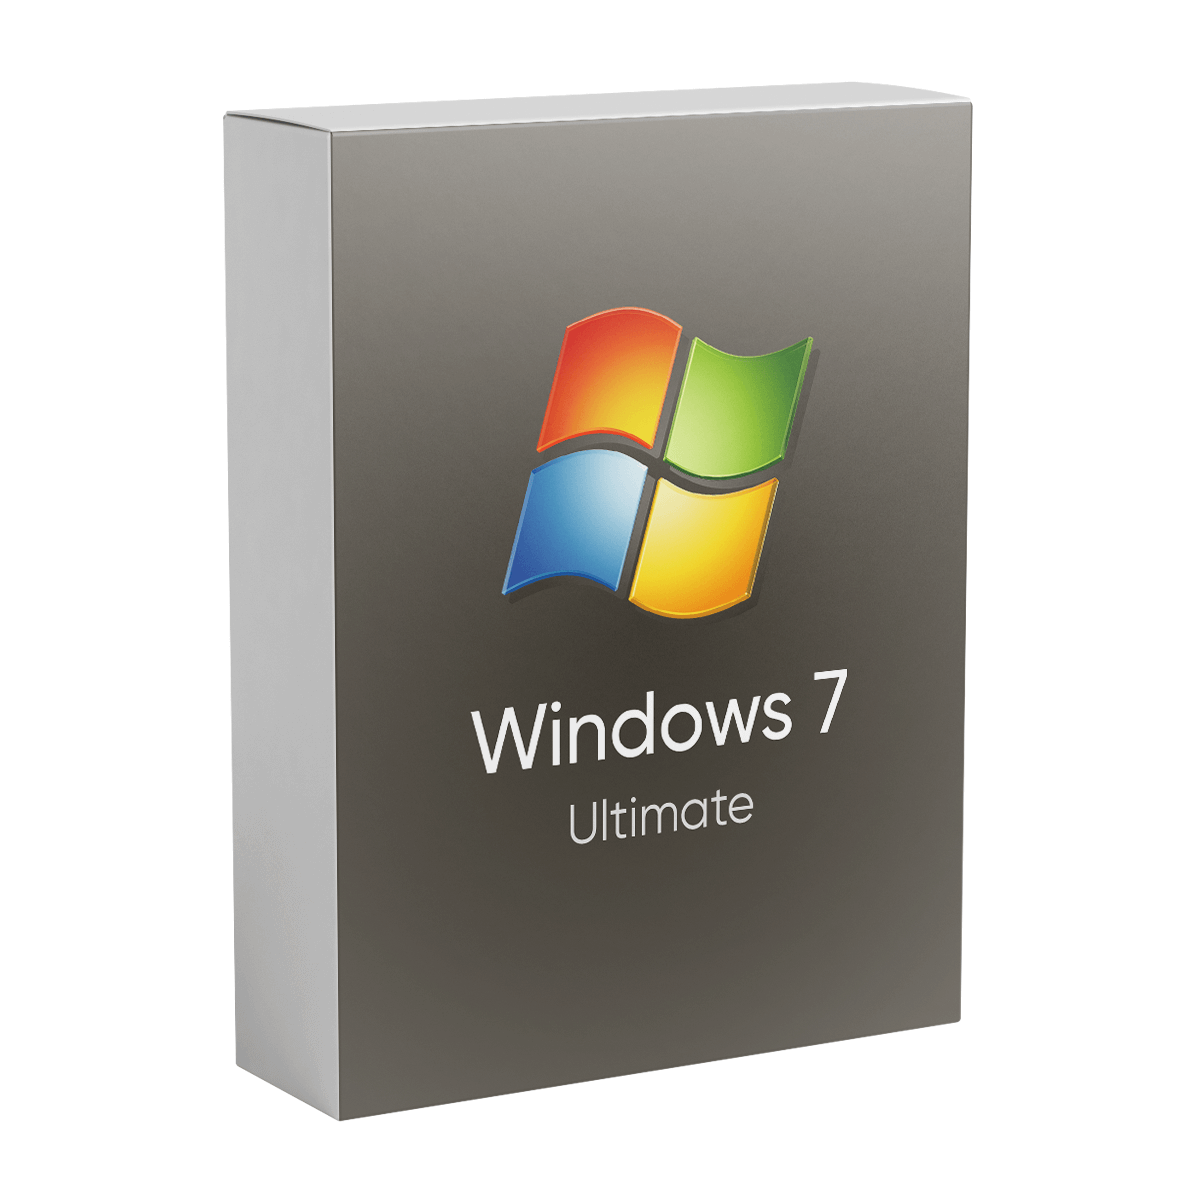 Windows 7 Ultimate - Lifetime License for 1 PC